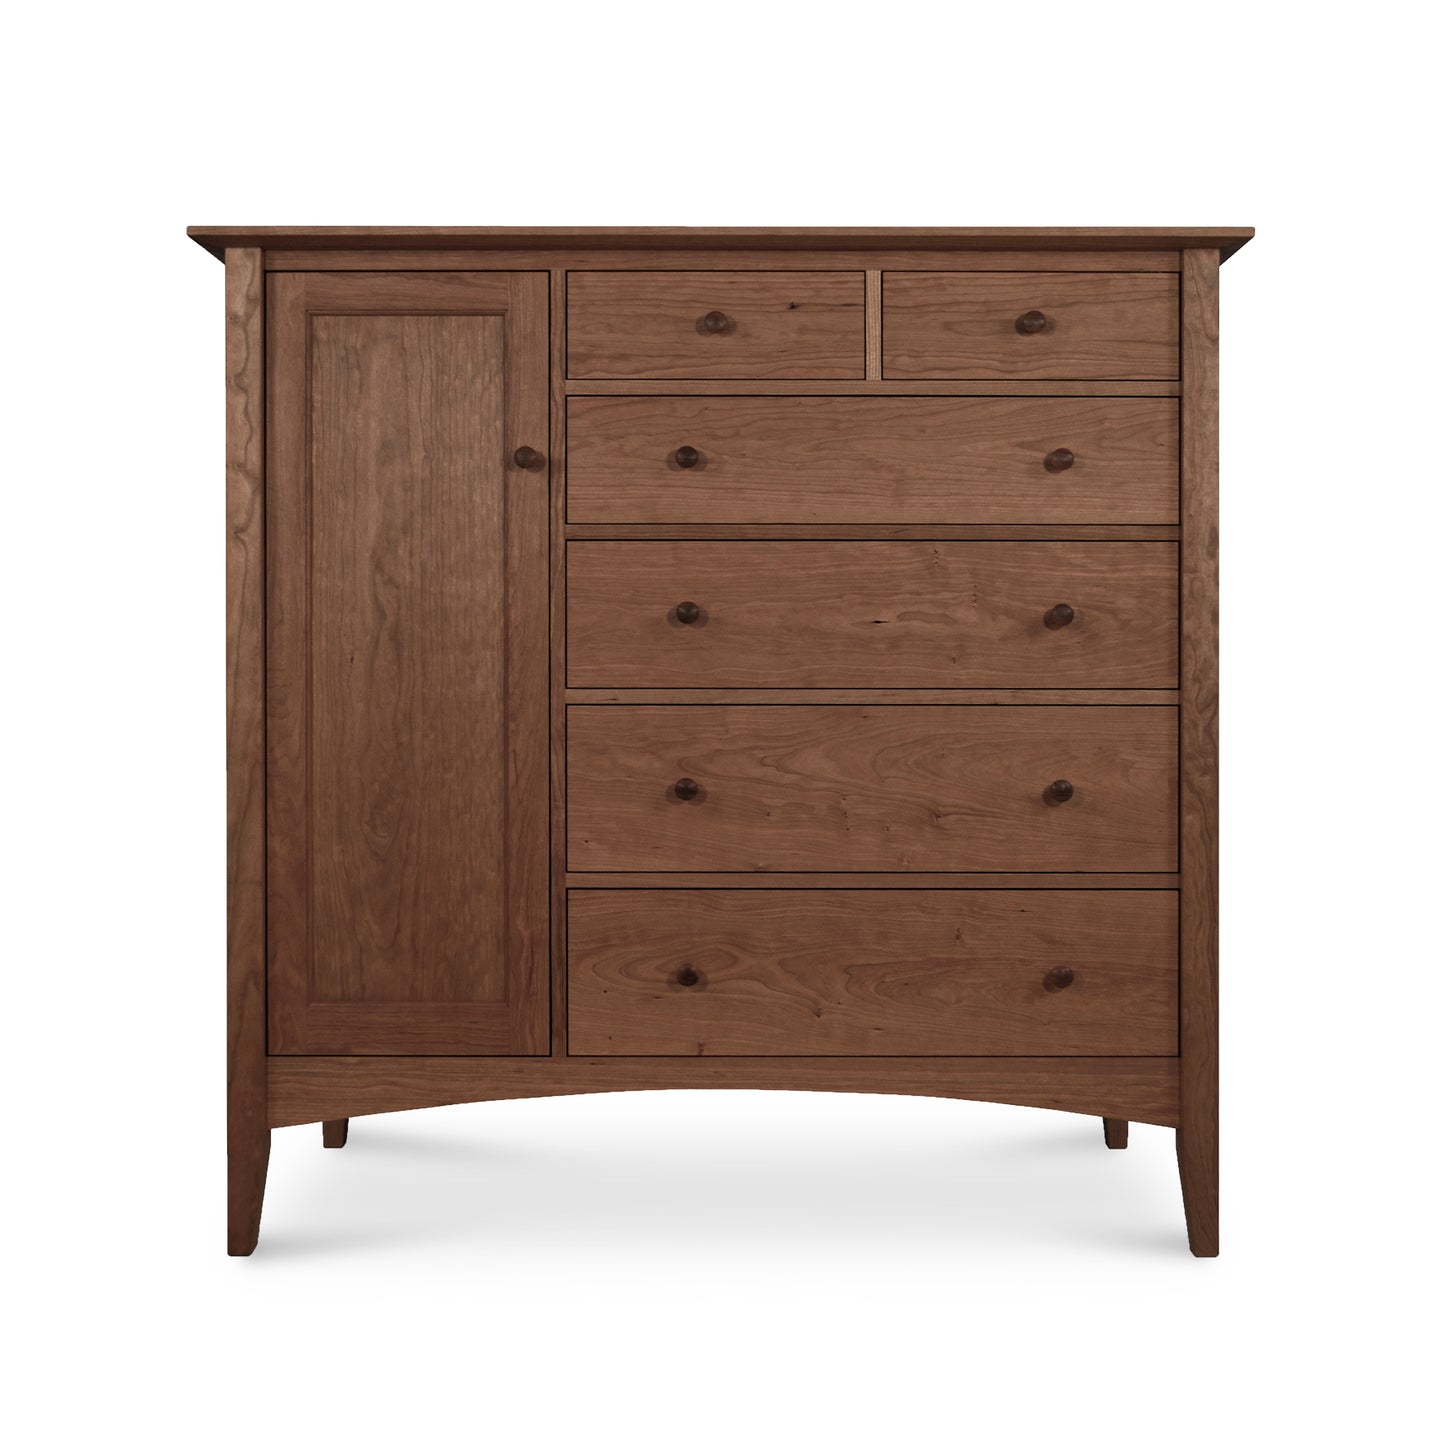 A solid hardwood Maple Corner Woodworks American Shaker Gent's Chest with an attached single-door cabinet on the left side, against a white background.